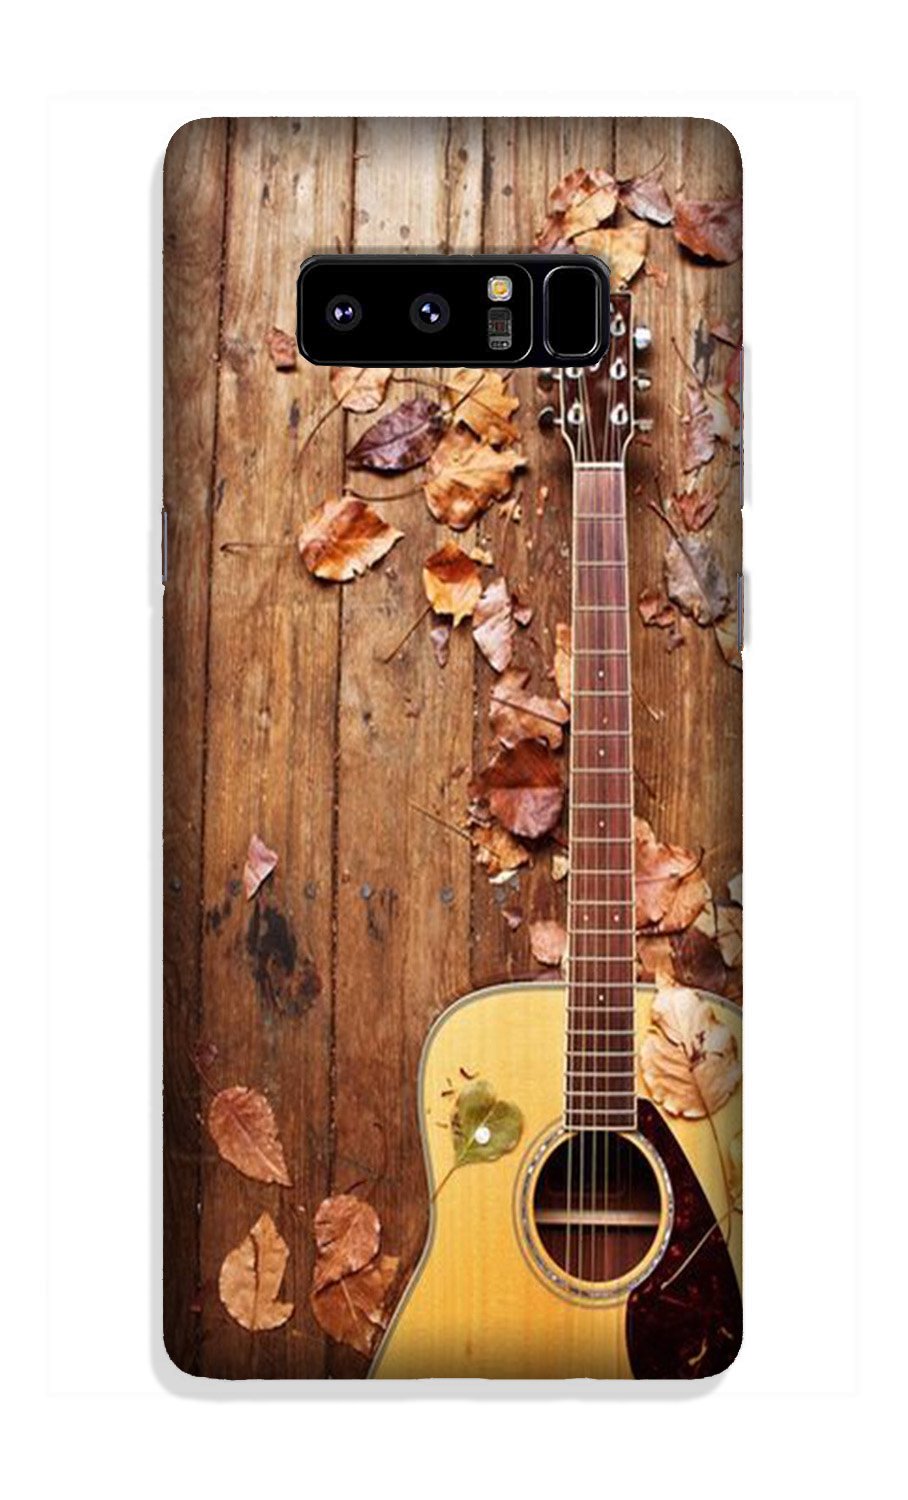 Guitar Case for Galaxy Note 8